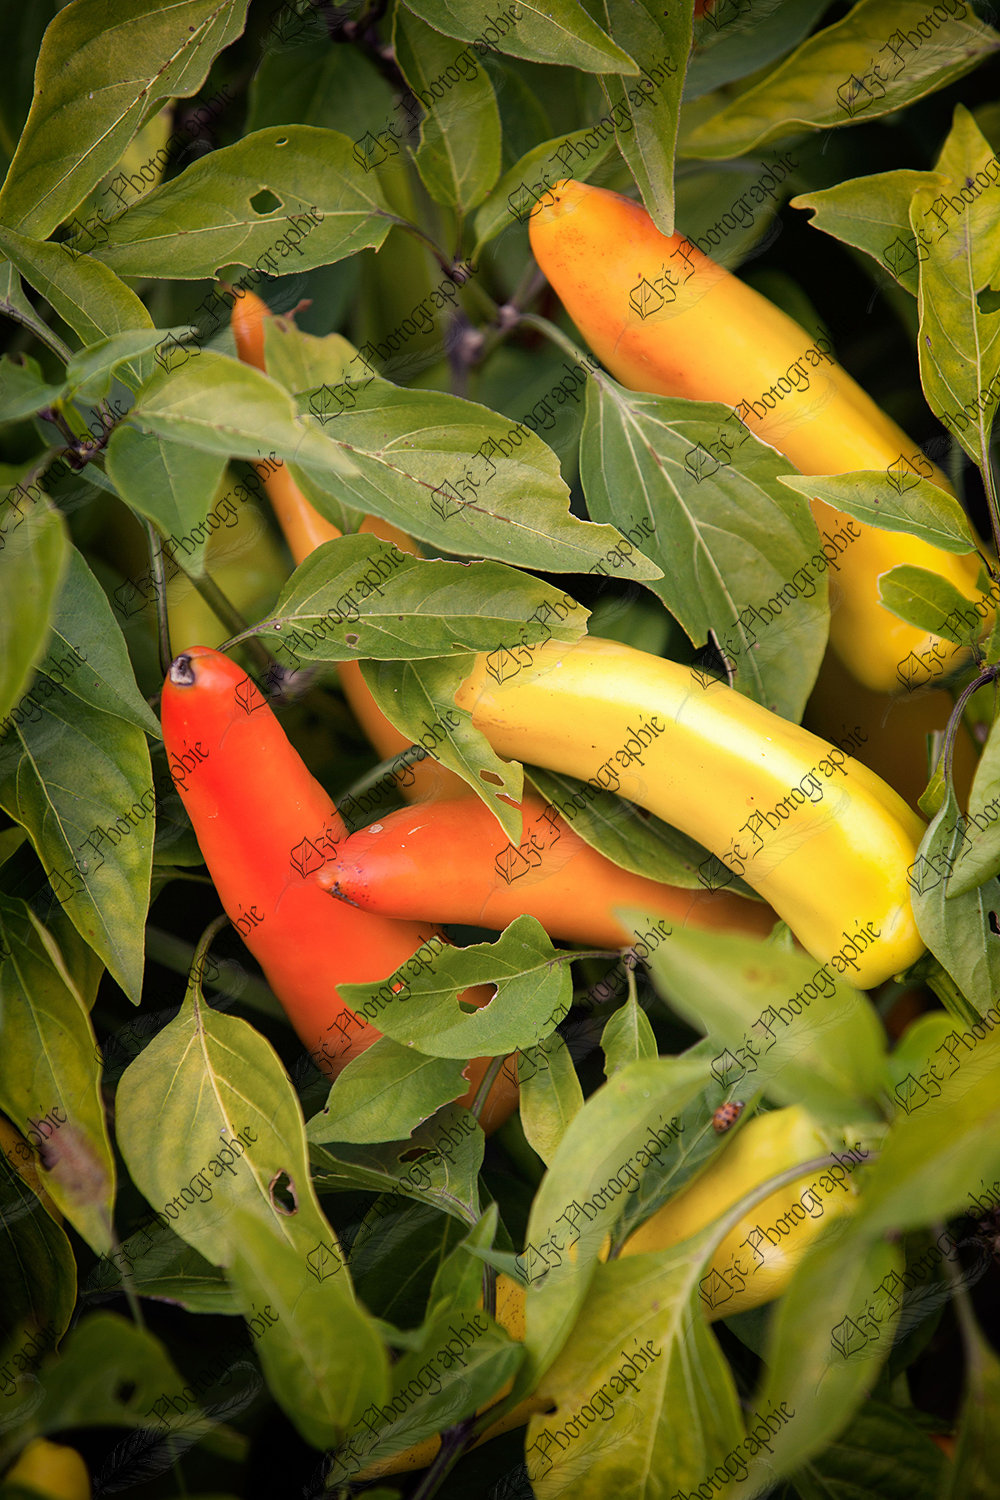 elze_photo_4667_petits_piments_delice_several_ready_peppers